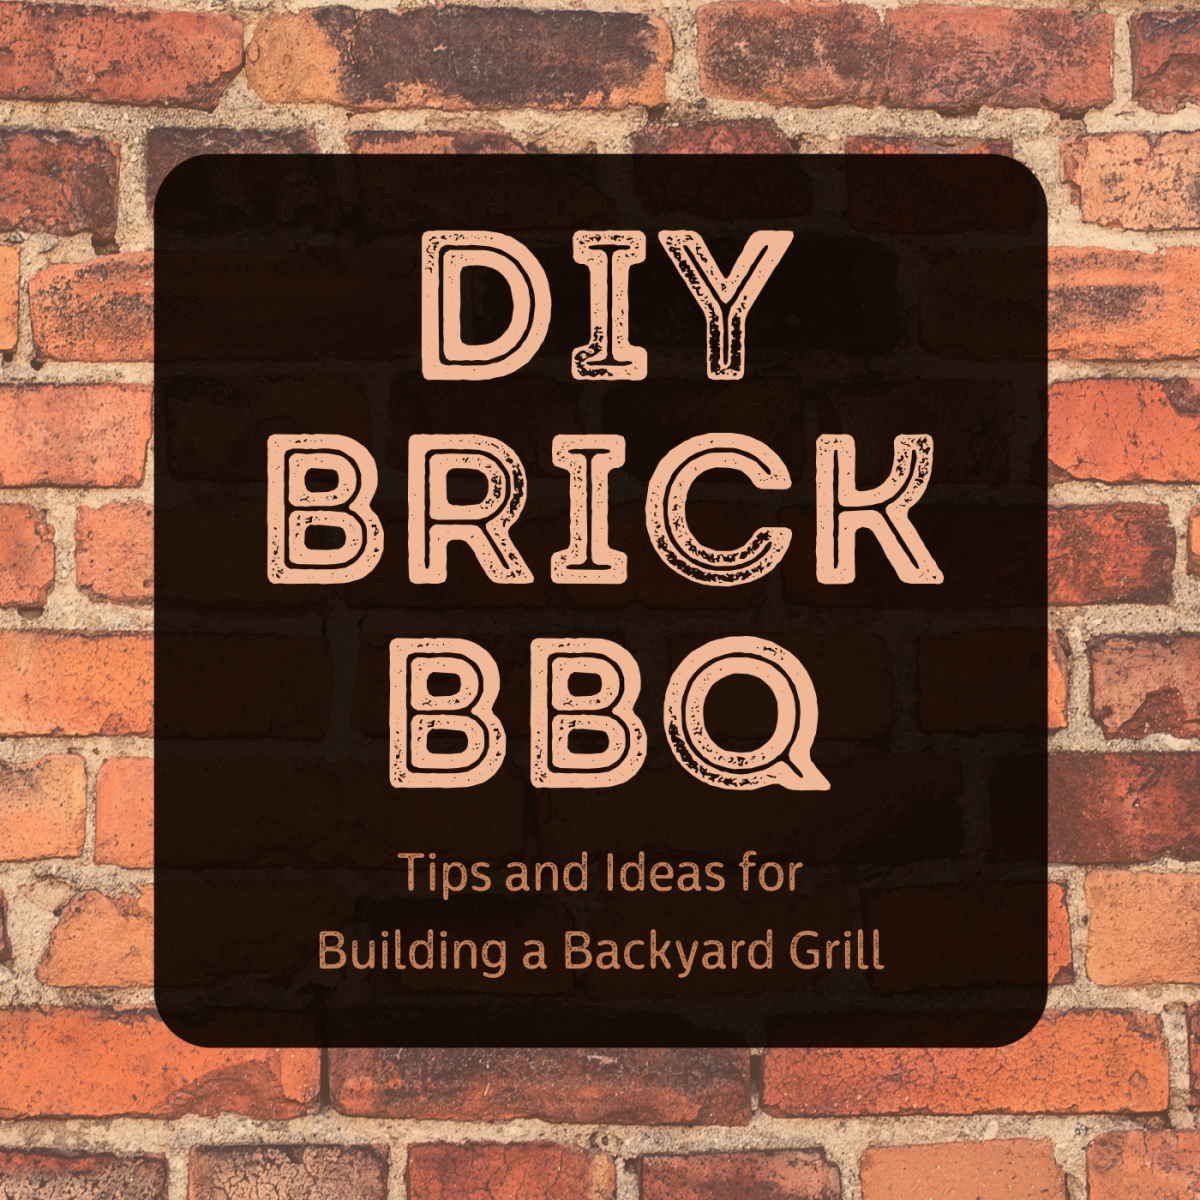 Learn how to build a brick barbecue grill for your backyard!